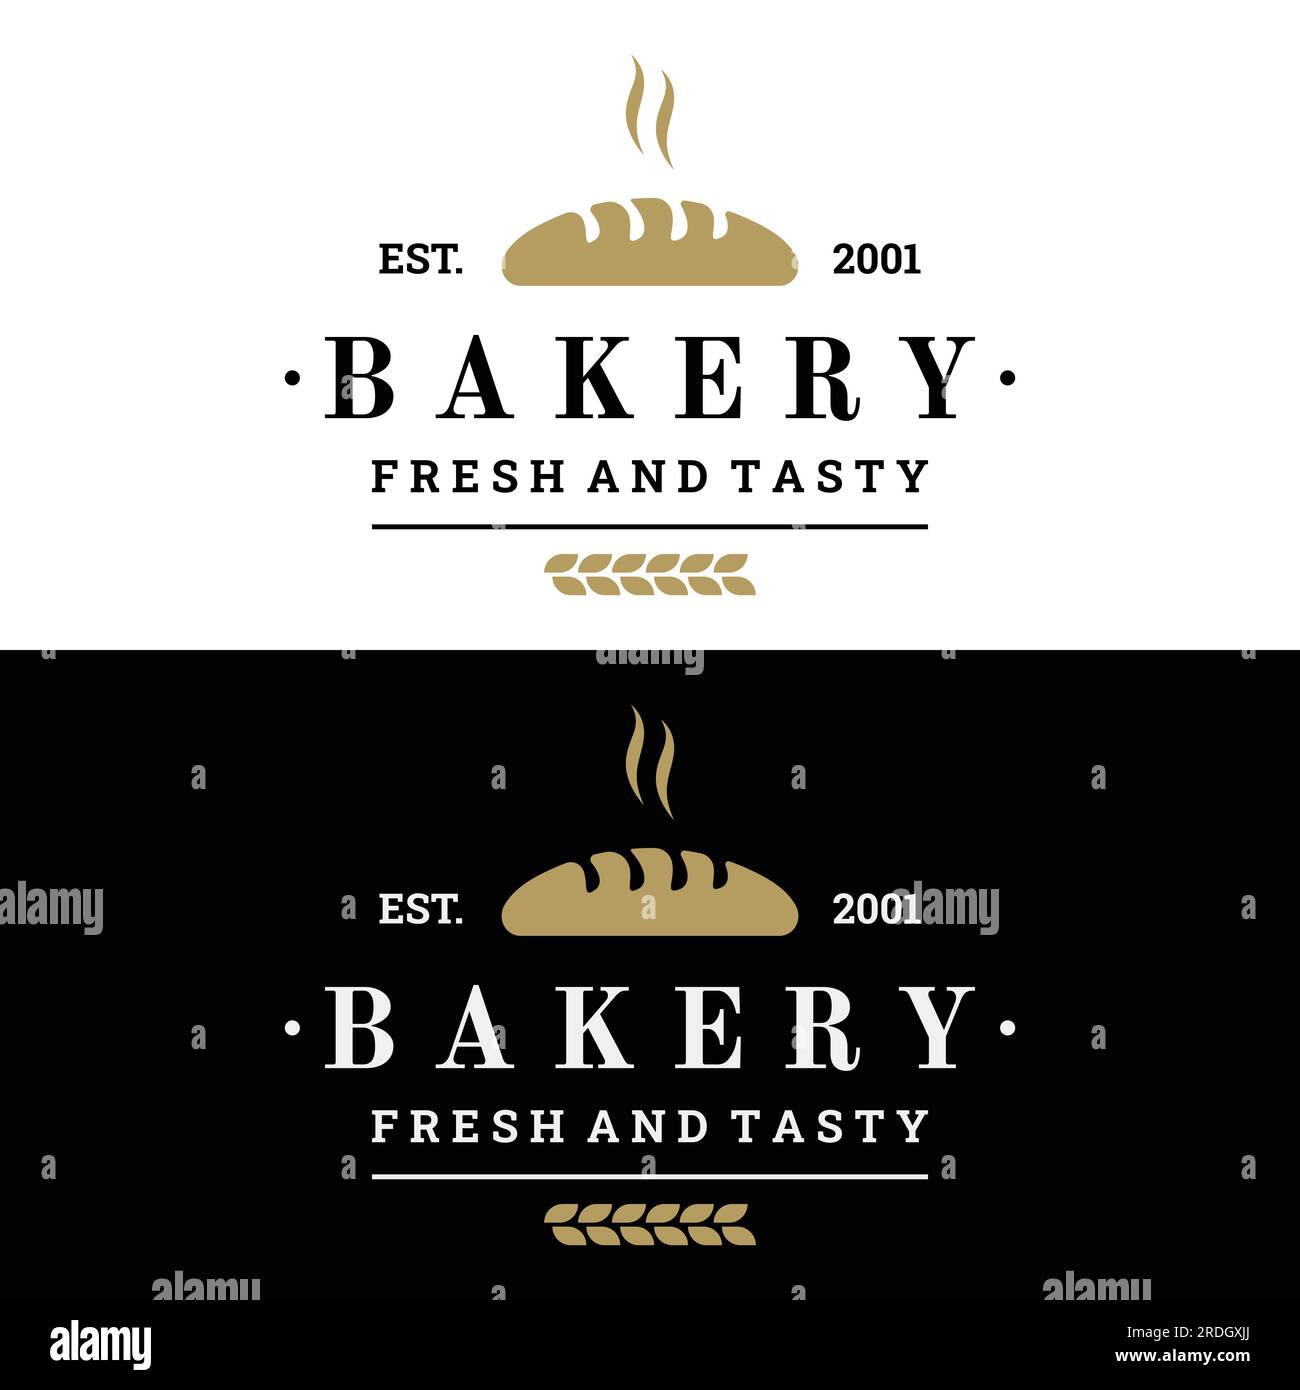 Retro wheat bread logo template. Badge for bakery, home made bakery, restaurant or cafe, patisserie, business. Stock Vector